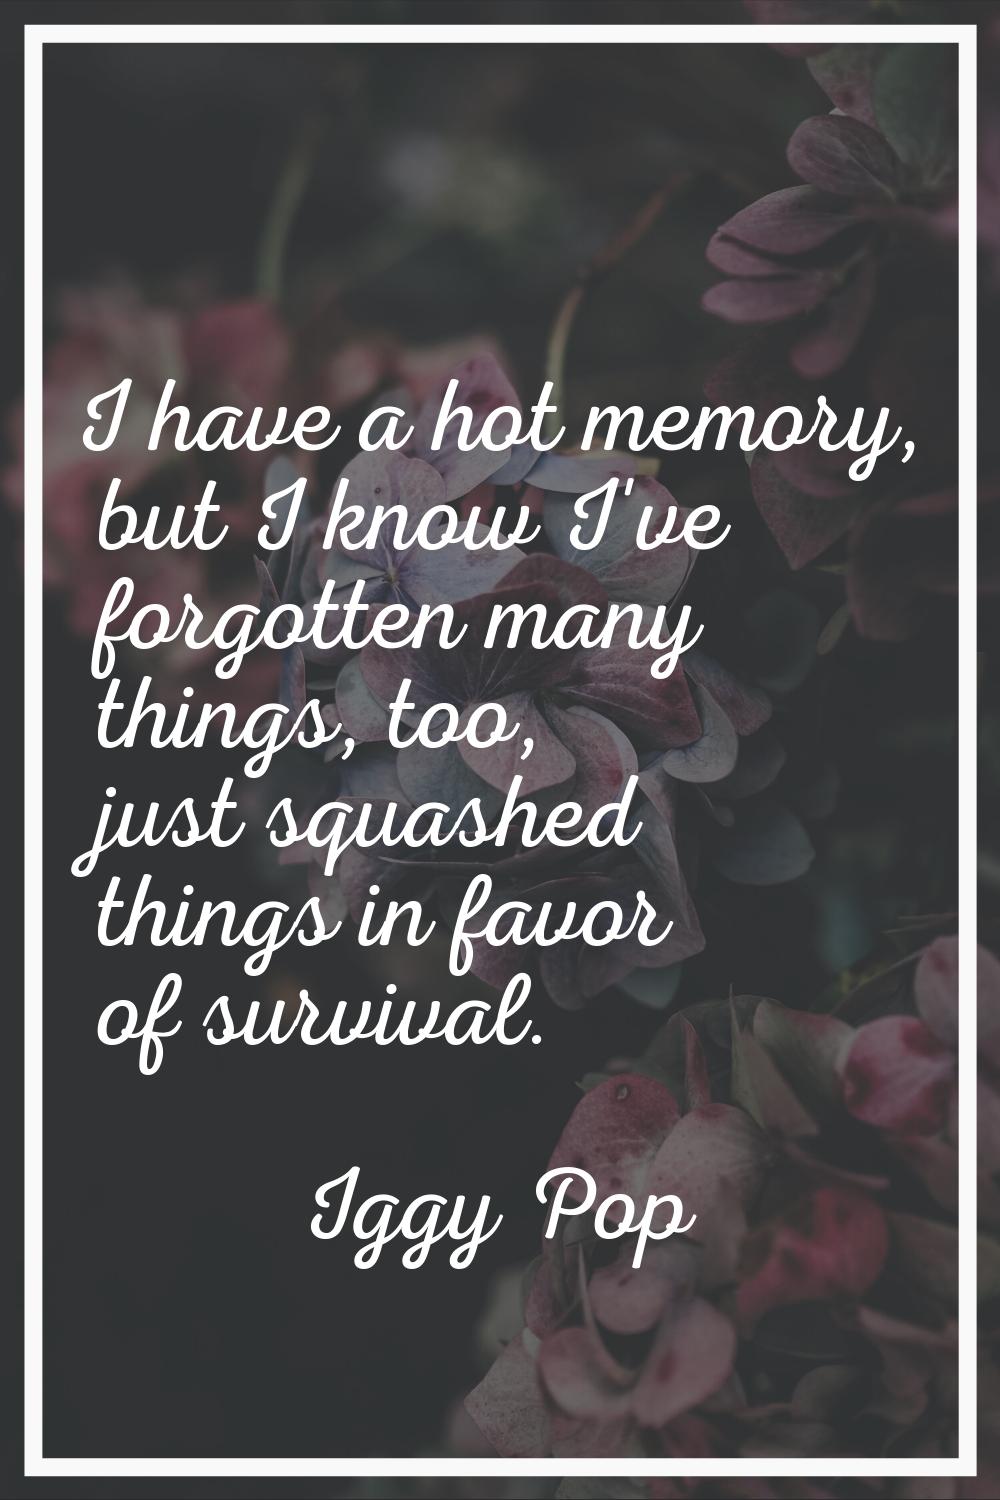 I have a hot memory, but I know I've forgotten many things, too, just squashed things in favor of s